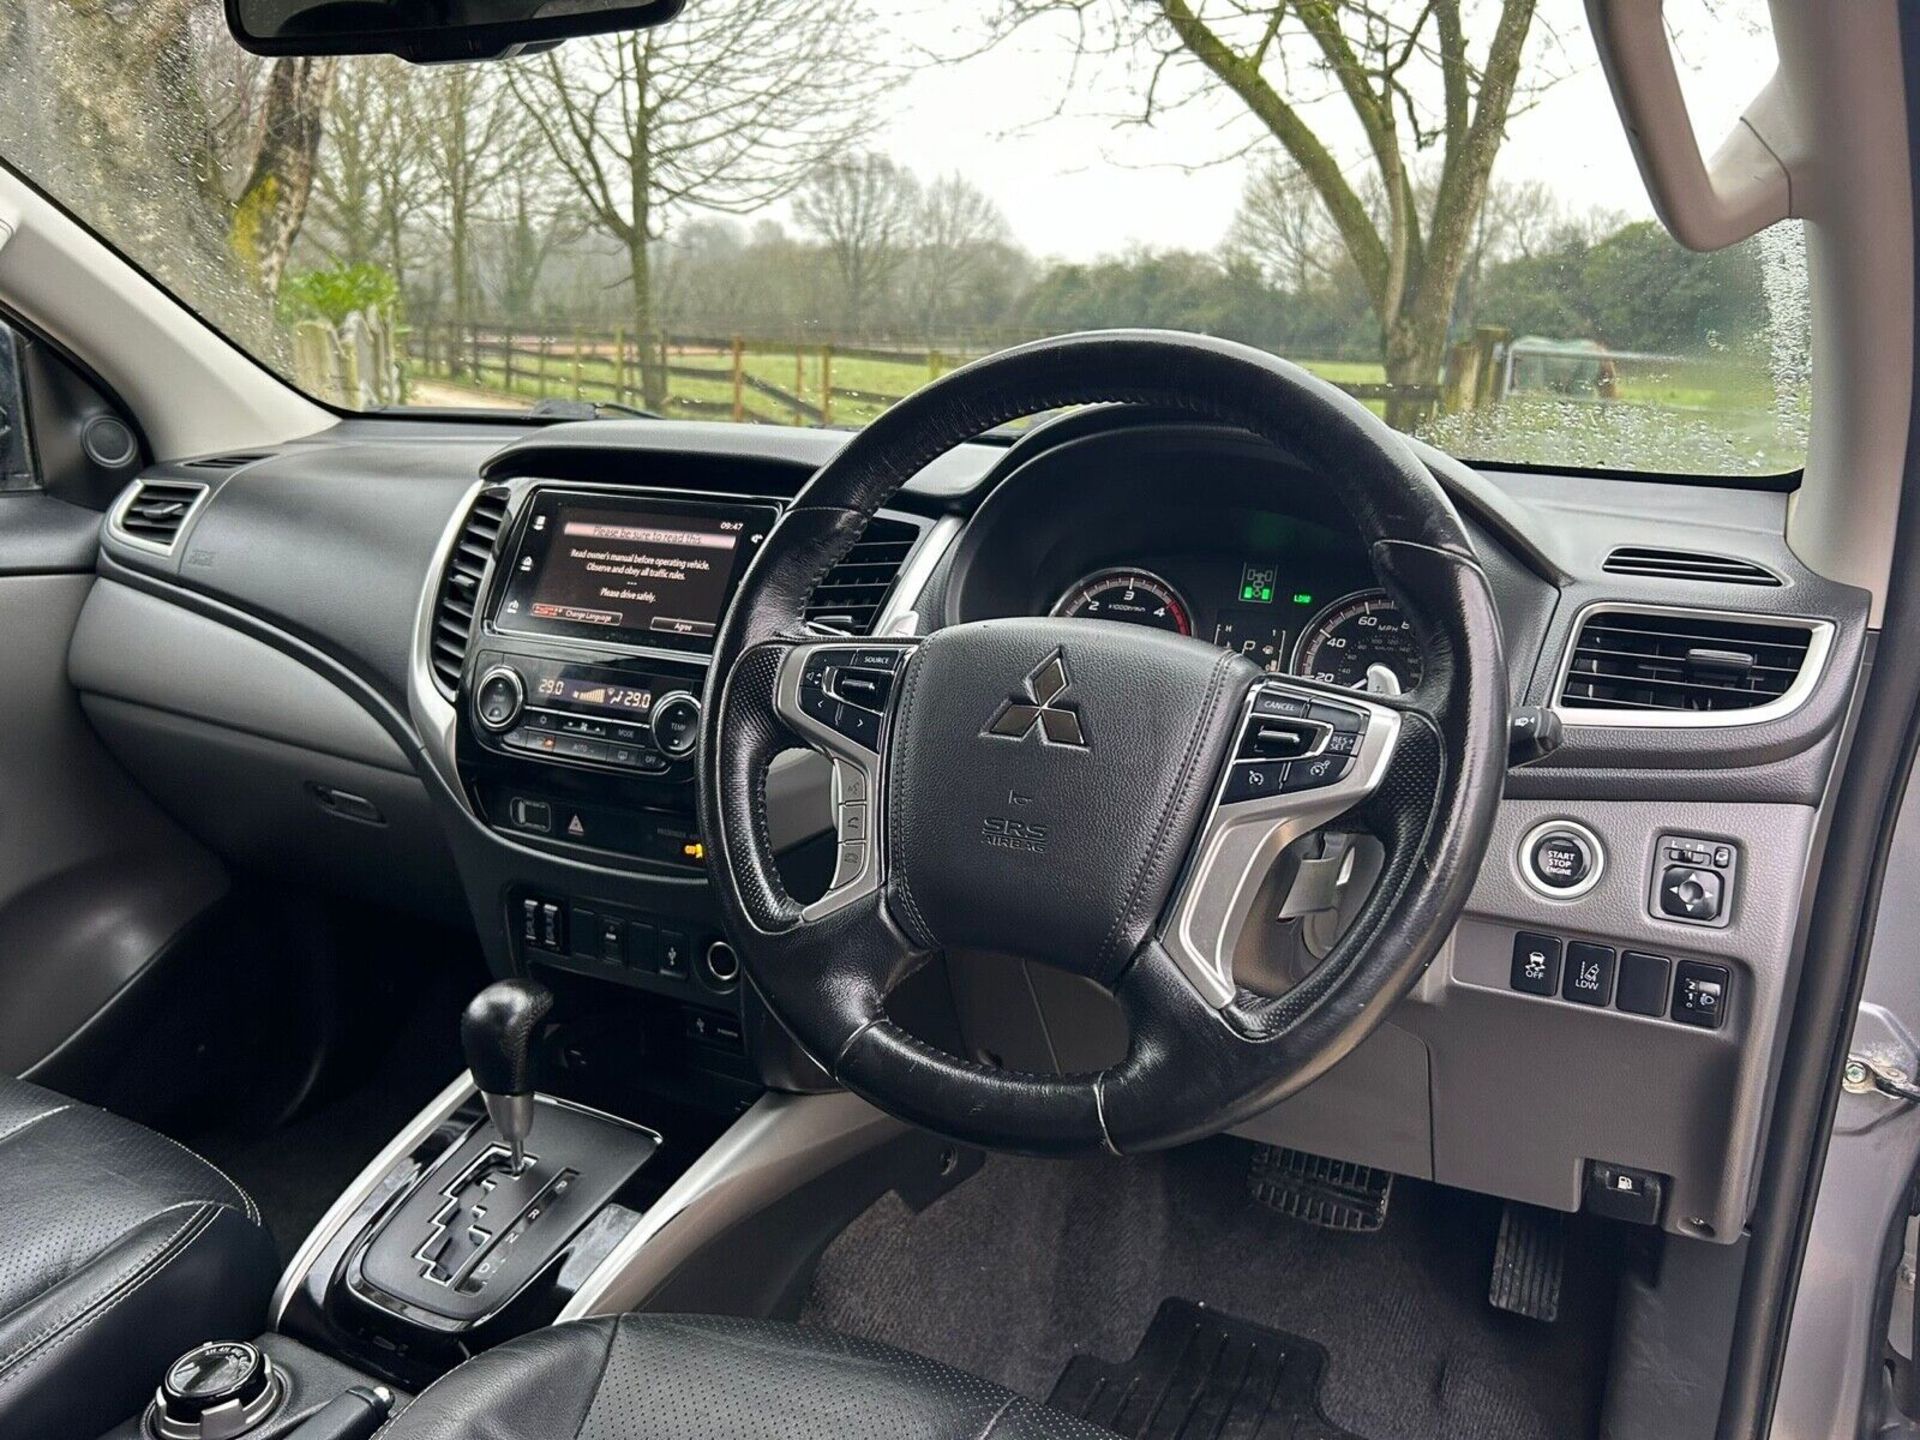 2018 MITSUBISHI L200 WARRIOR: IMMACULATE CONDITION, FAULTLESS DRIVE - Image 10 of 14